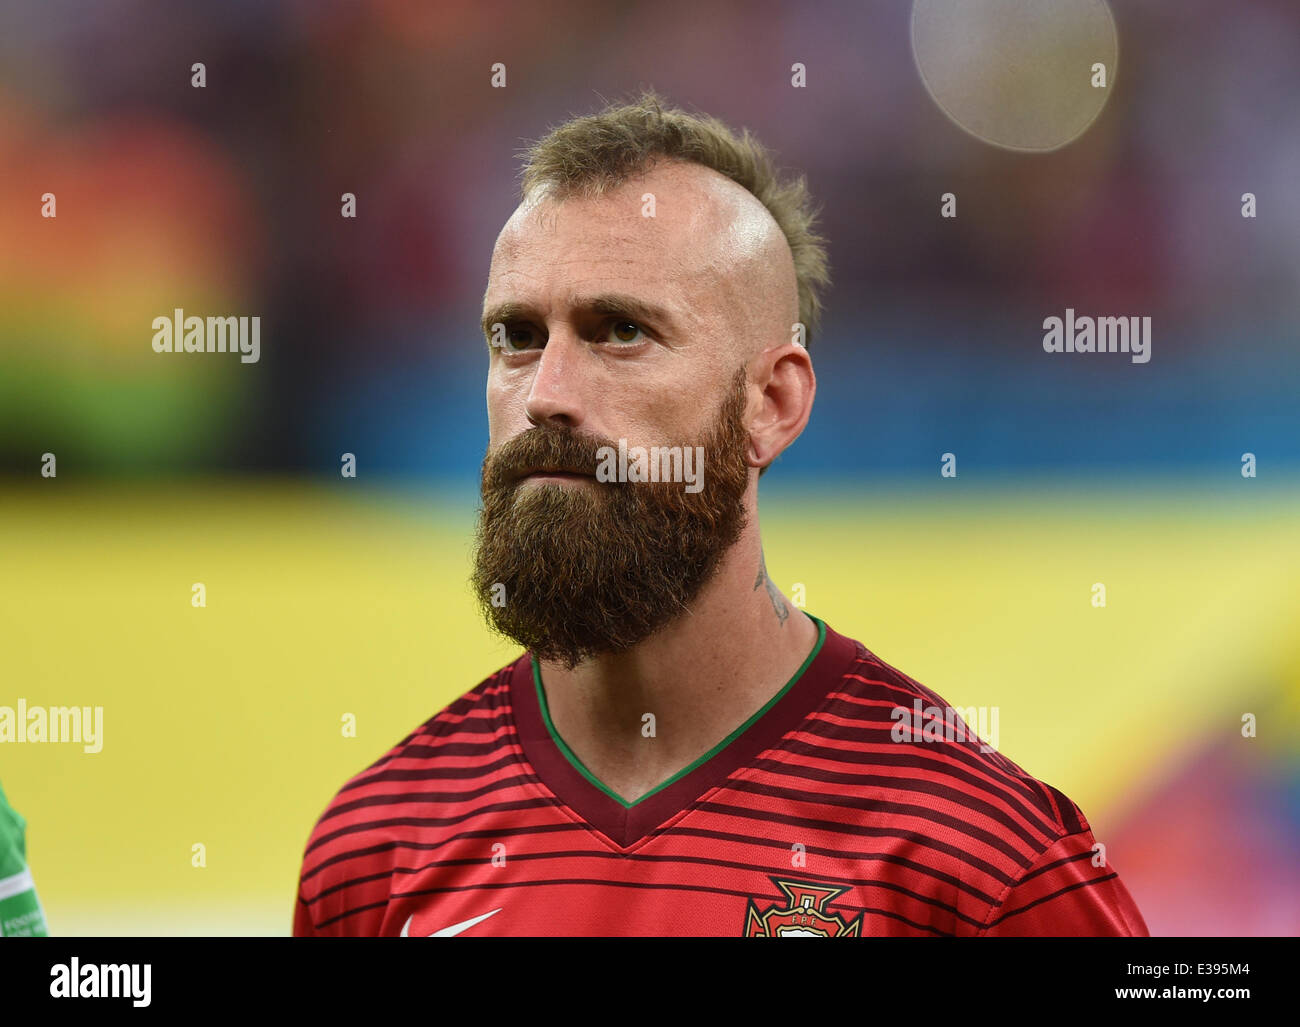 Manaus, Brazil. 22nd June, 2014. Raul Meireles of Portugal seen the national anthem prior to the FIFA World Cup 2014 group G preliminary round match between the USA and Portugal at the Arena Amazonia Stadium in Manaus, Brazil, 22 June 2014. Photo: Marius Becker/dpa/Alamy Live News Stock Photo